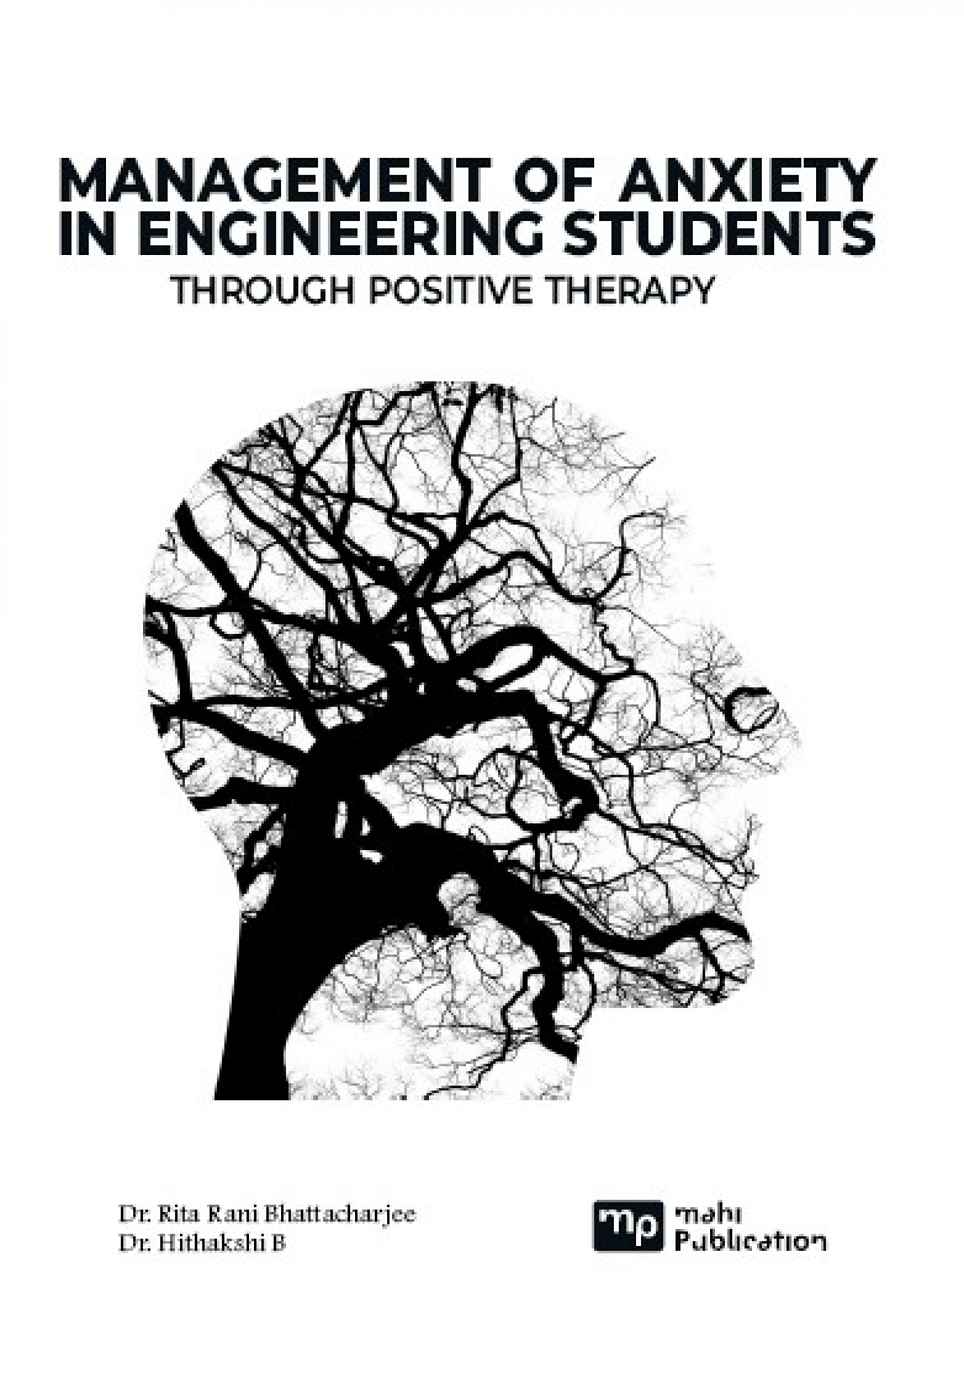 Management of Anxiety in Engineering Students Through Positive Therapy